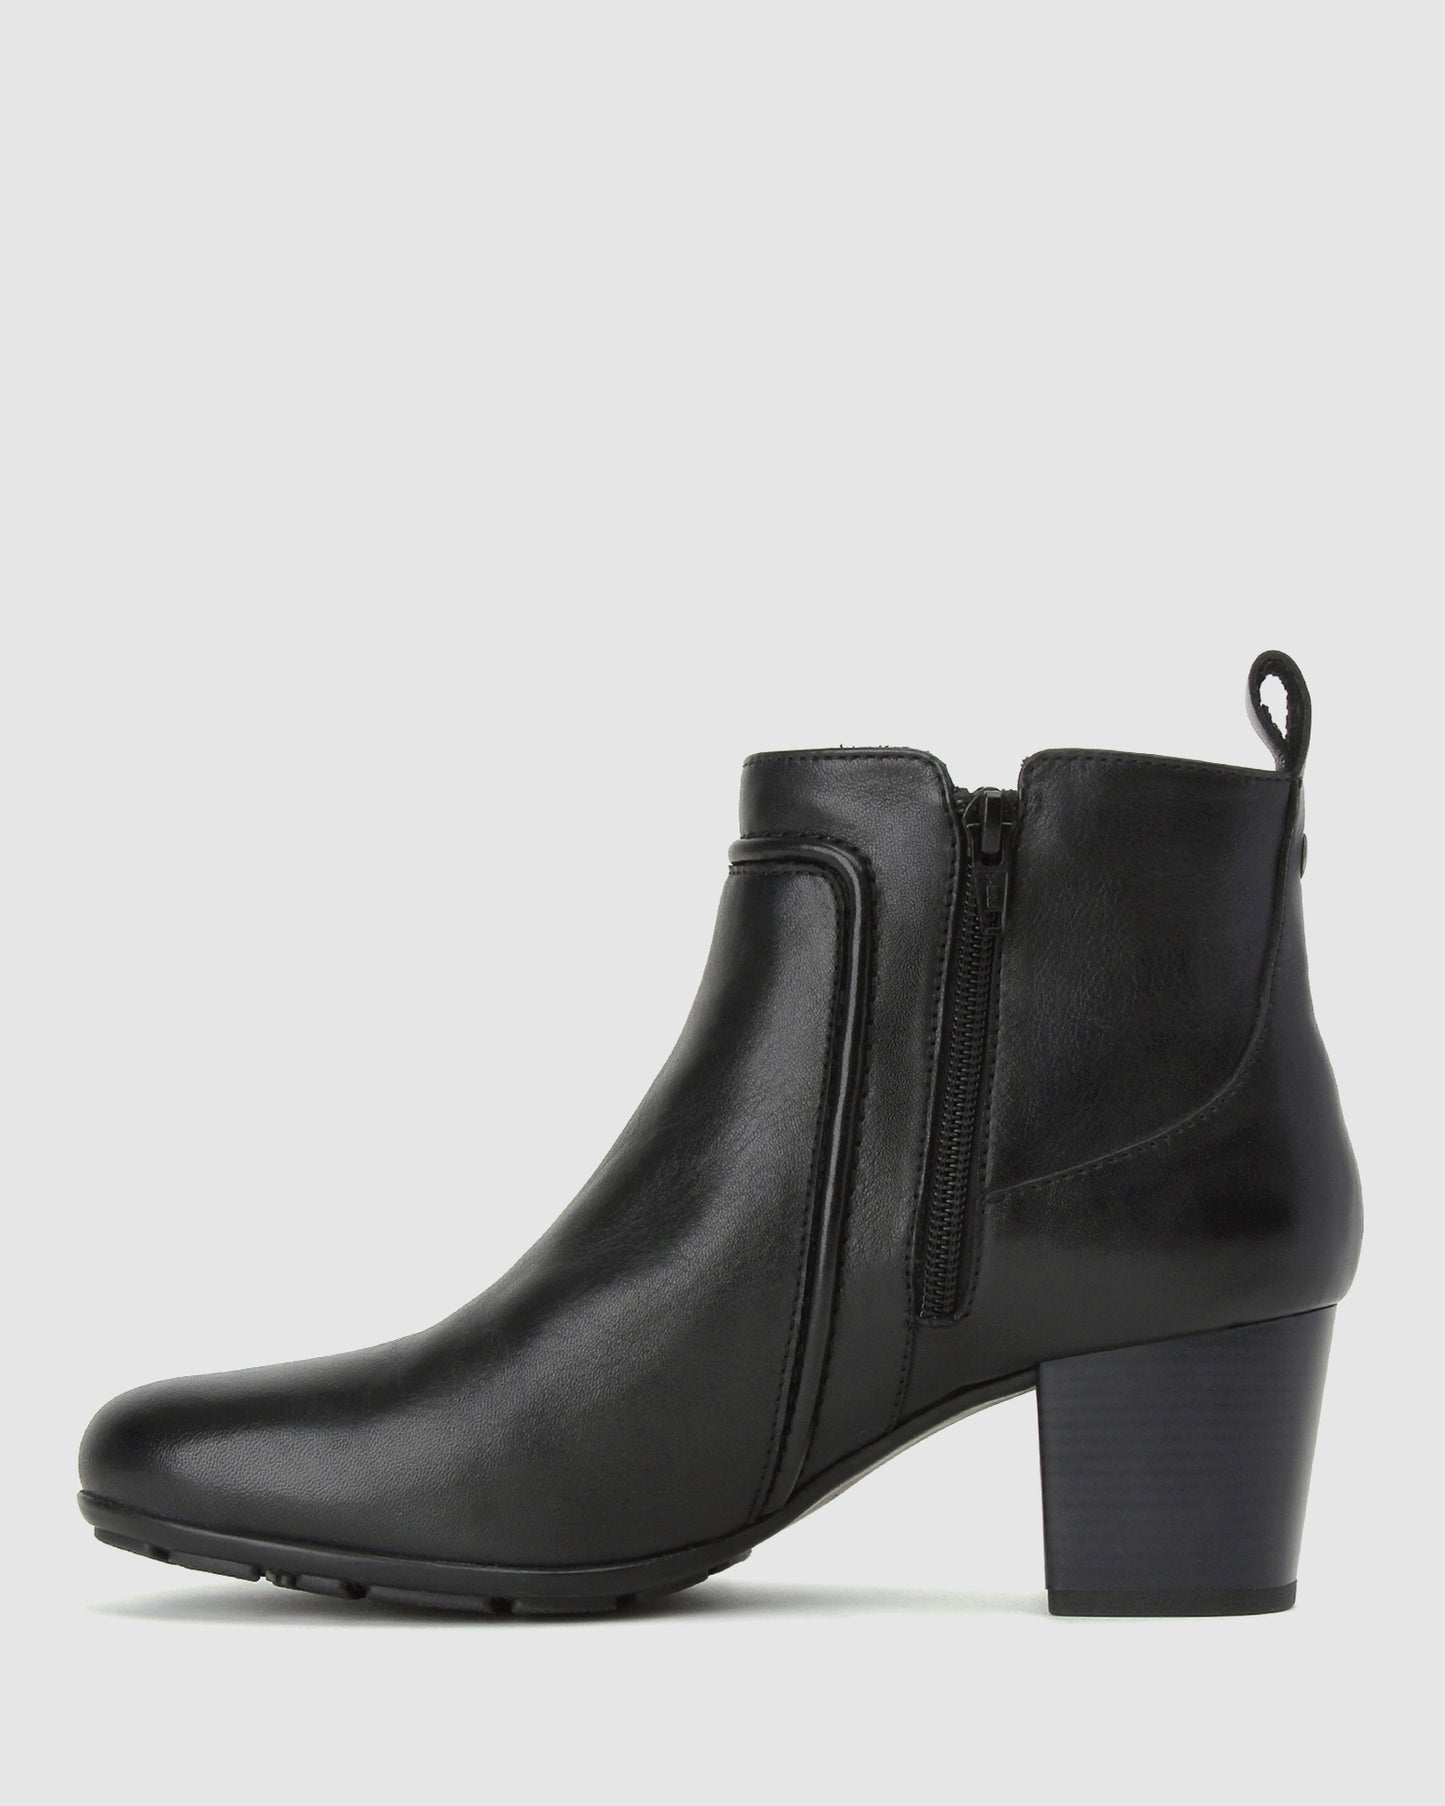 GHOST Leather Ankle Boots